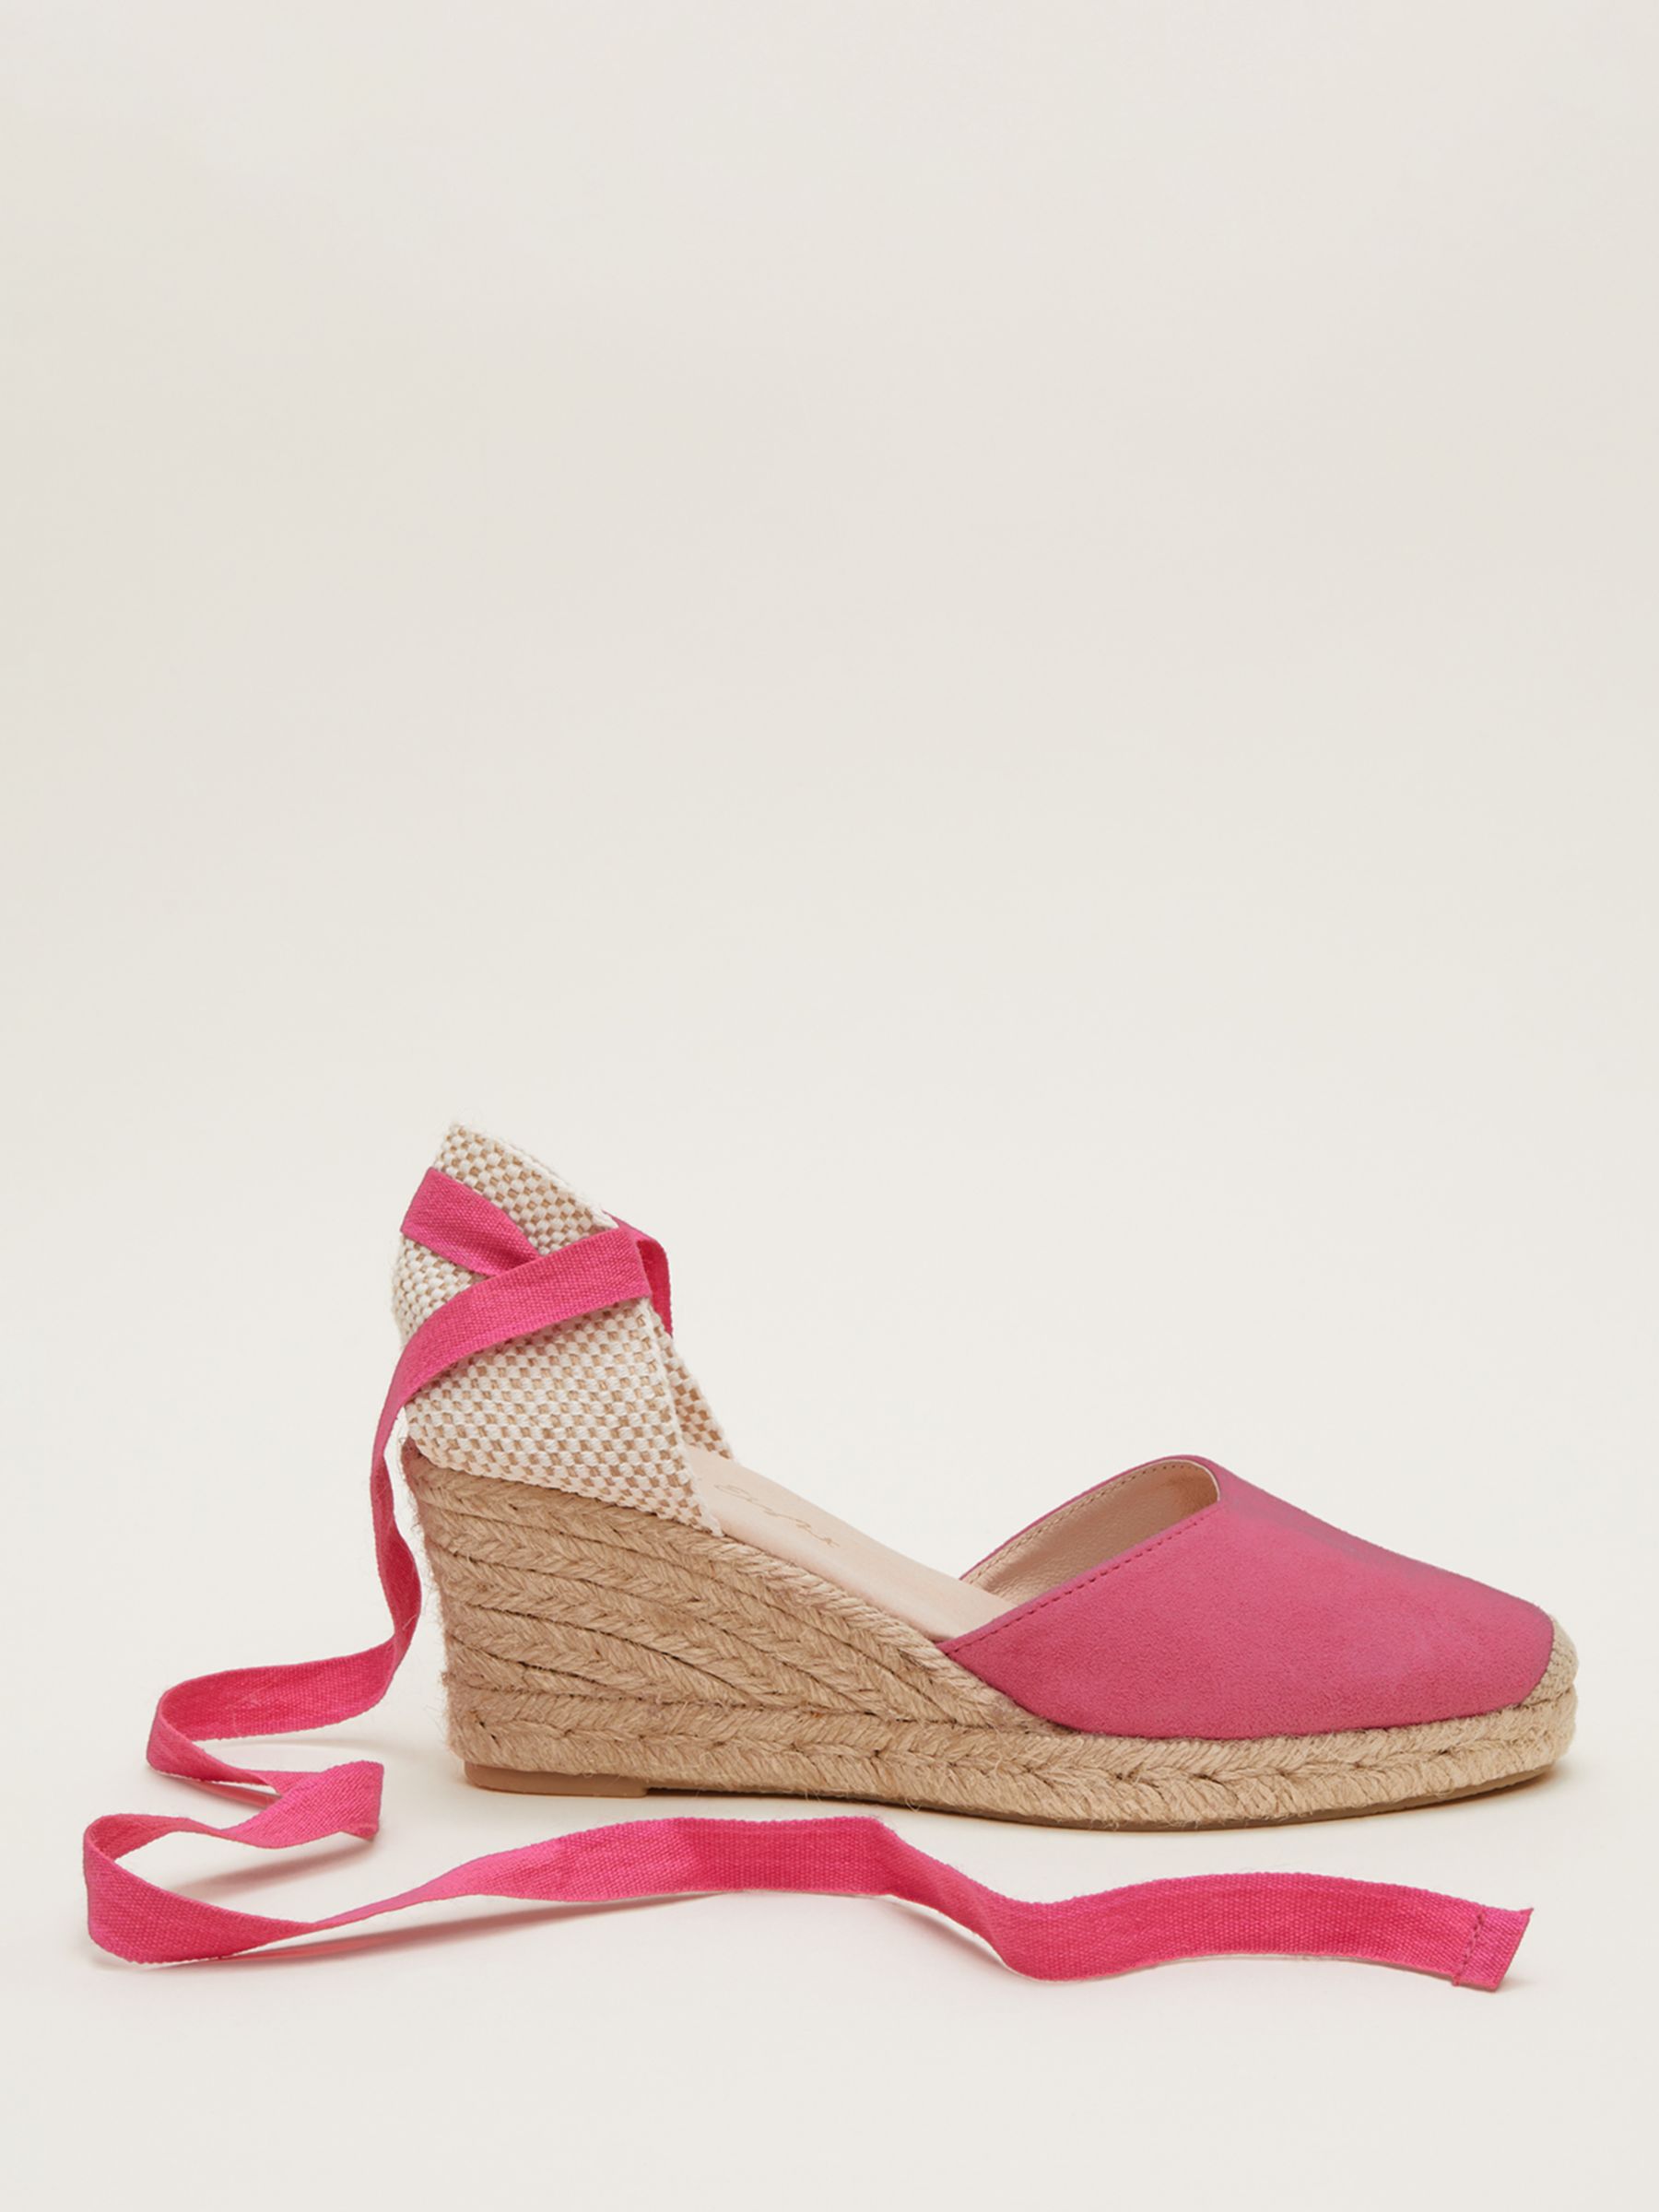 Buy Closed Toe Ankle Strap Espadrille Shoes from Next